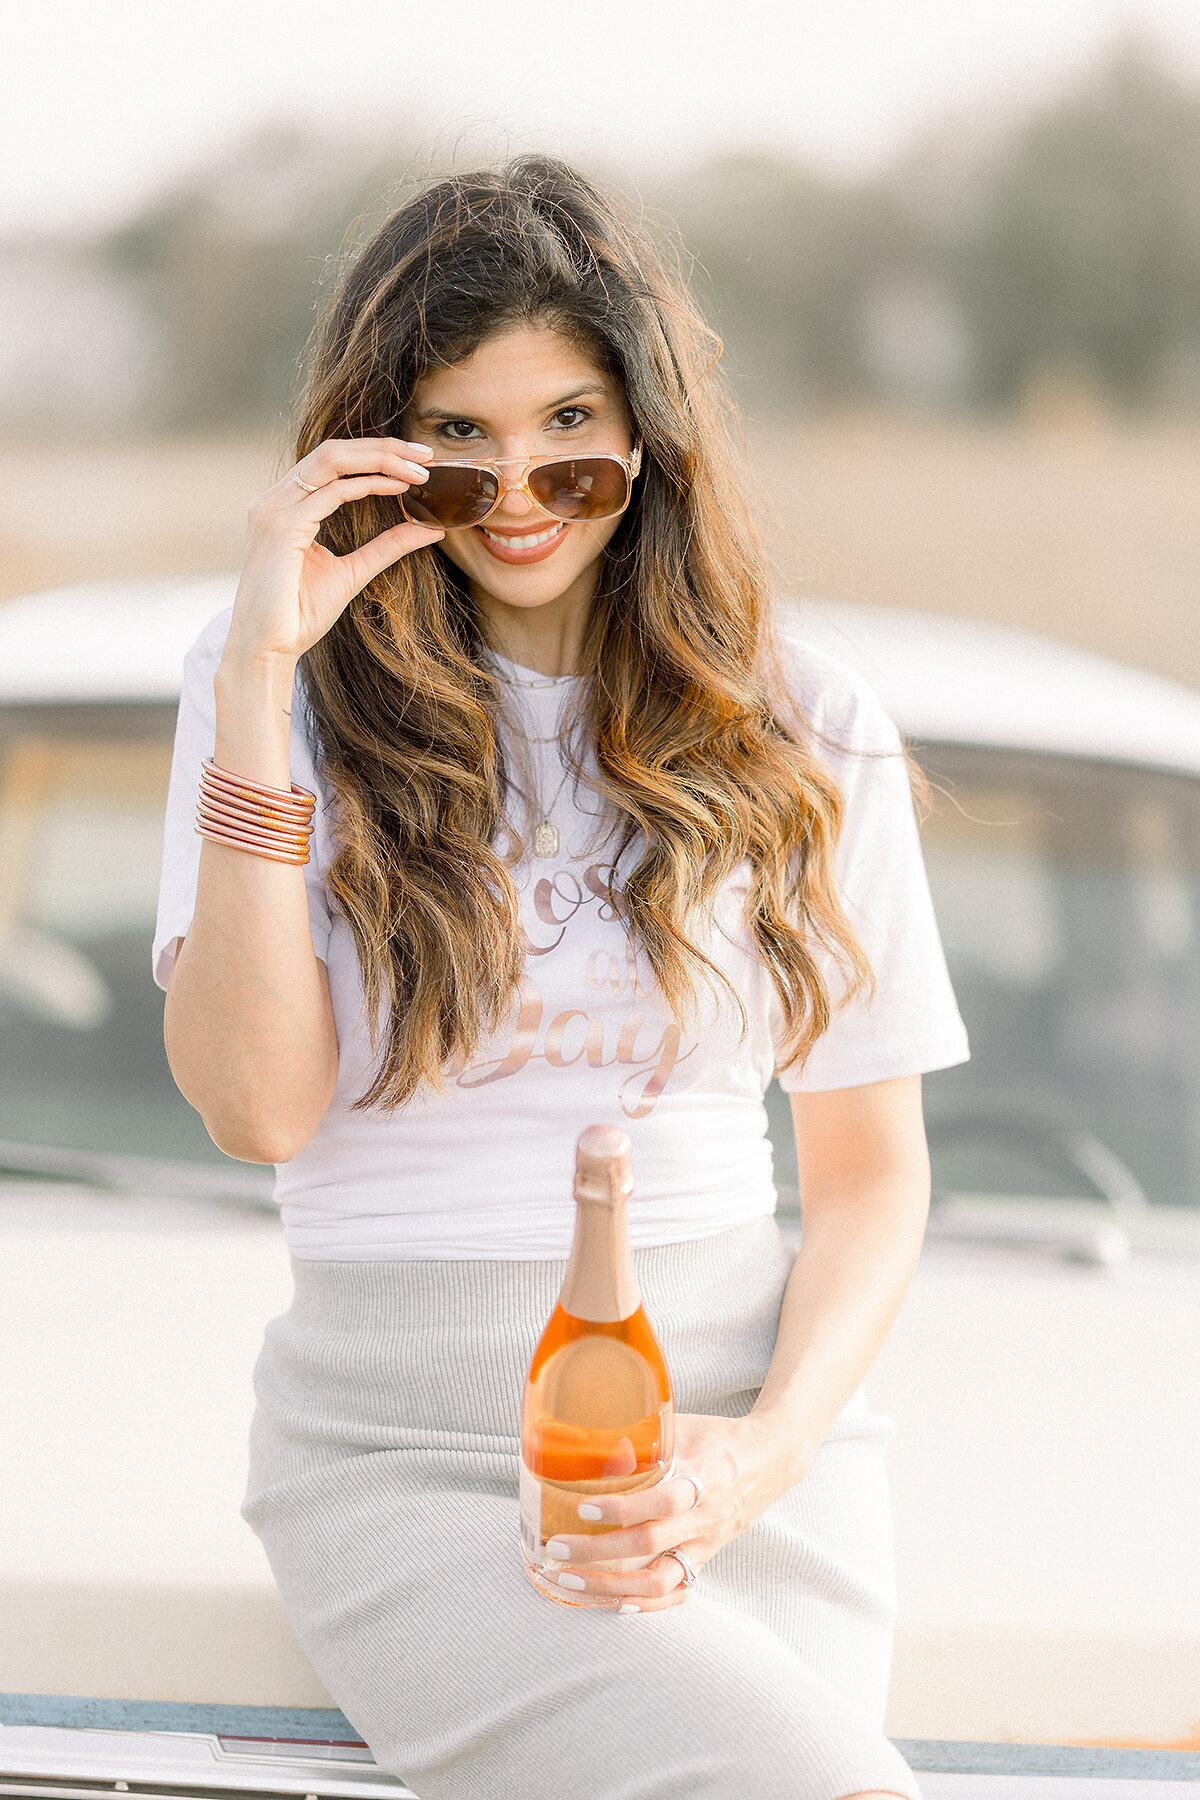 Photo of a professional DFW business owner sitting on the hood of a vintage car playfully posing for her headshot photos and pulling her glasses down from her face.